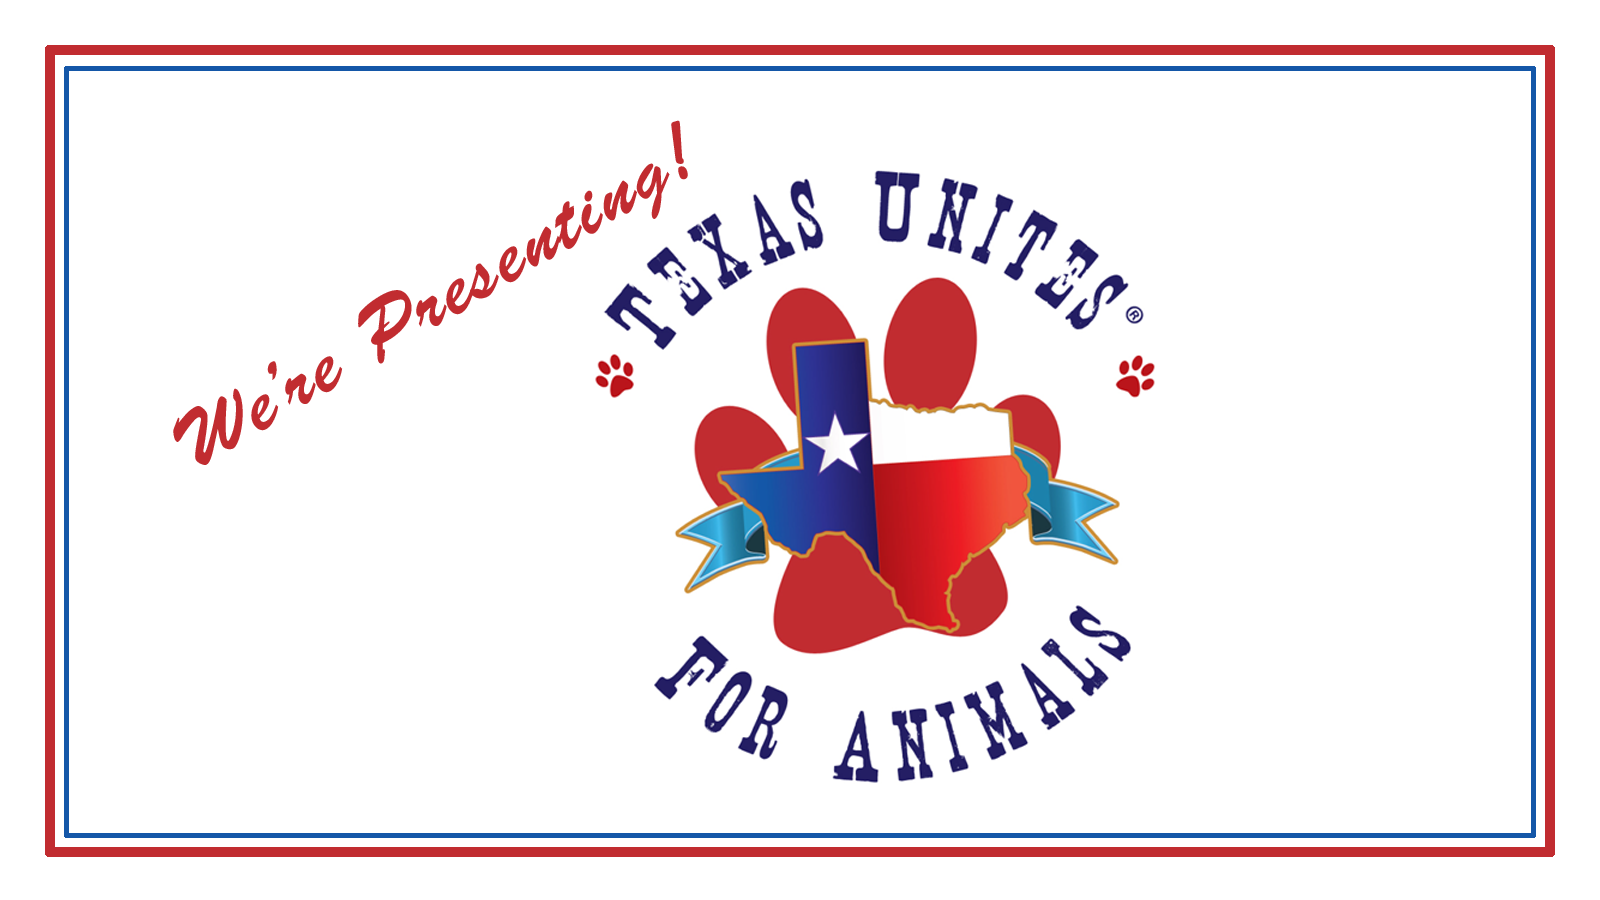 Texas Unites for Animals Conference logo